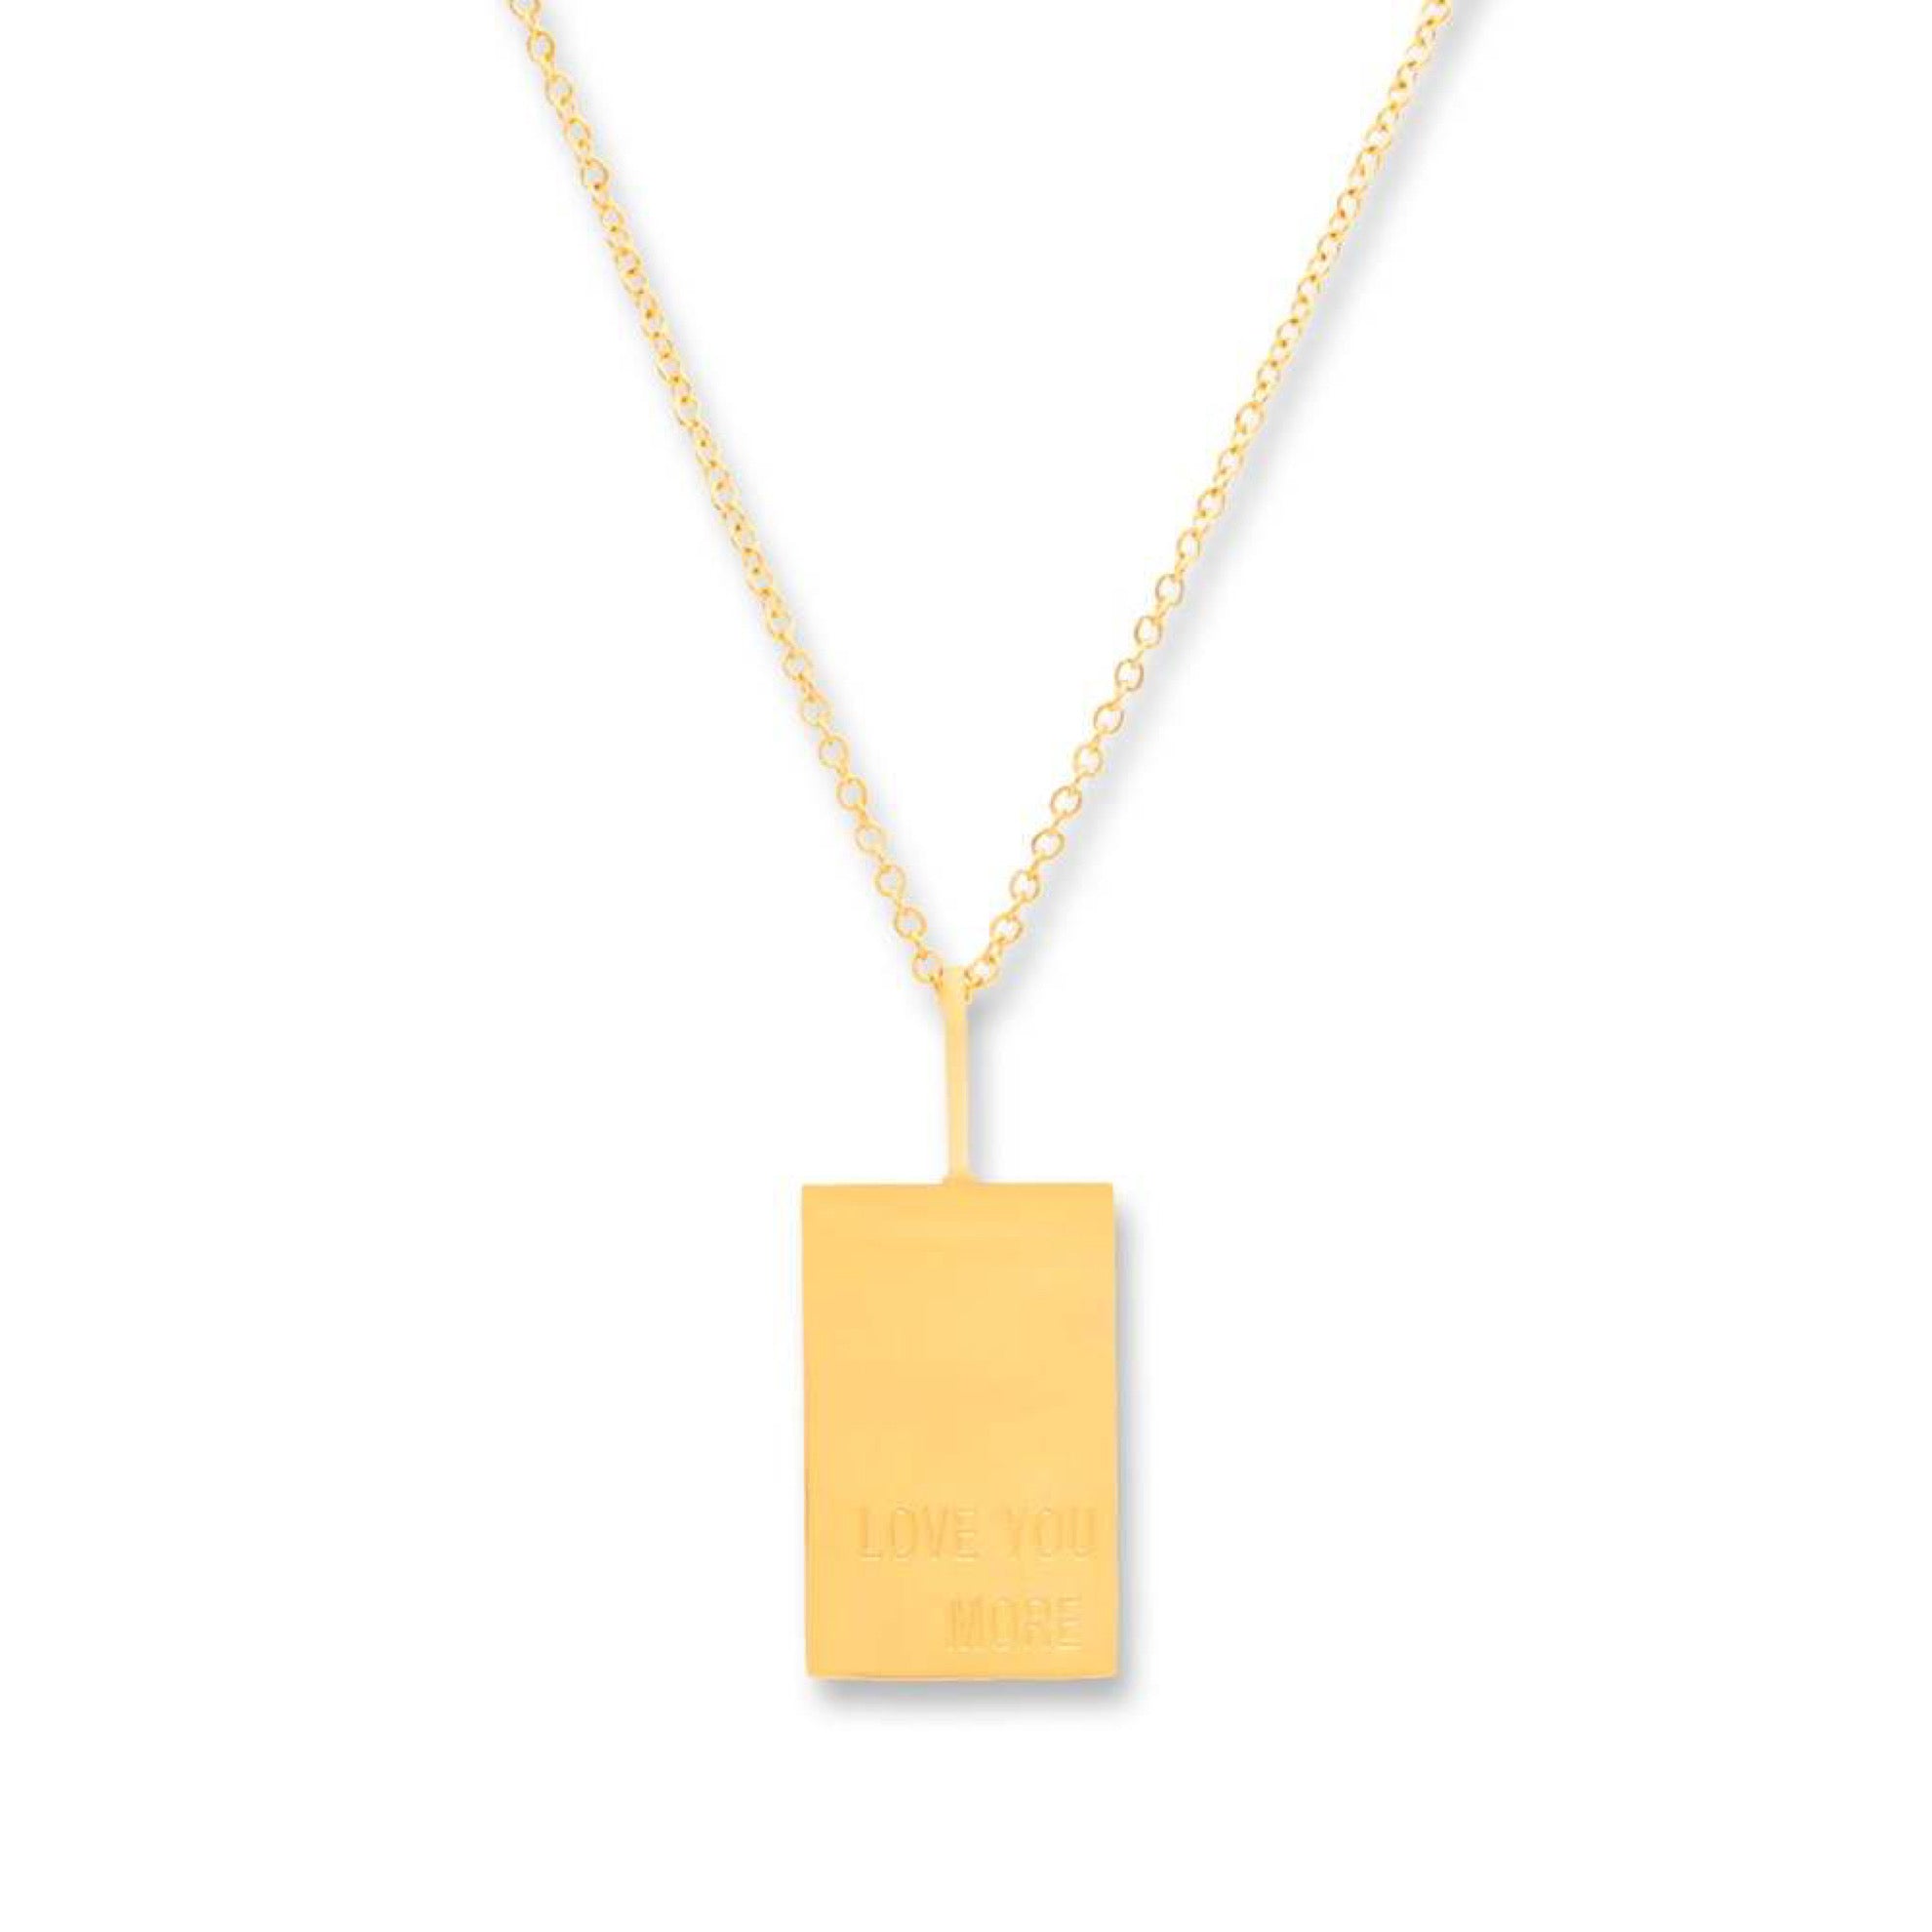 The Love You More Tag Gold Necklace